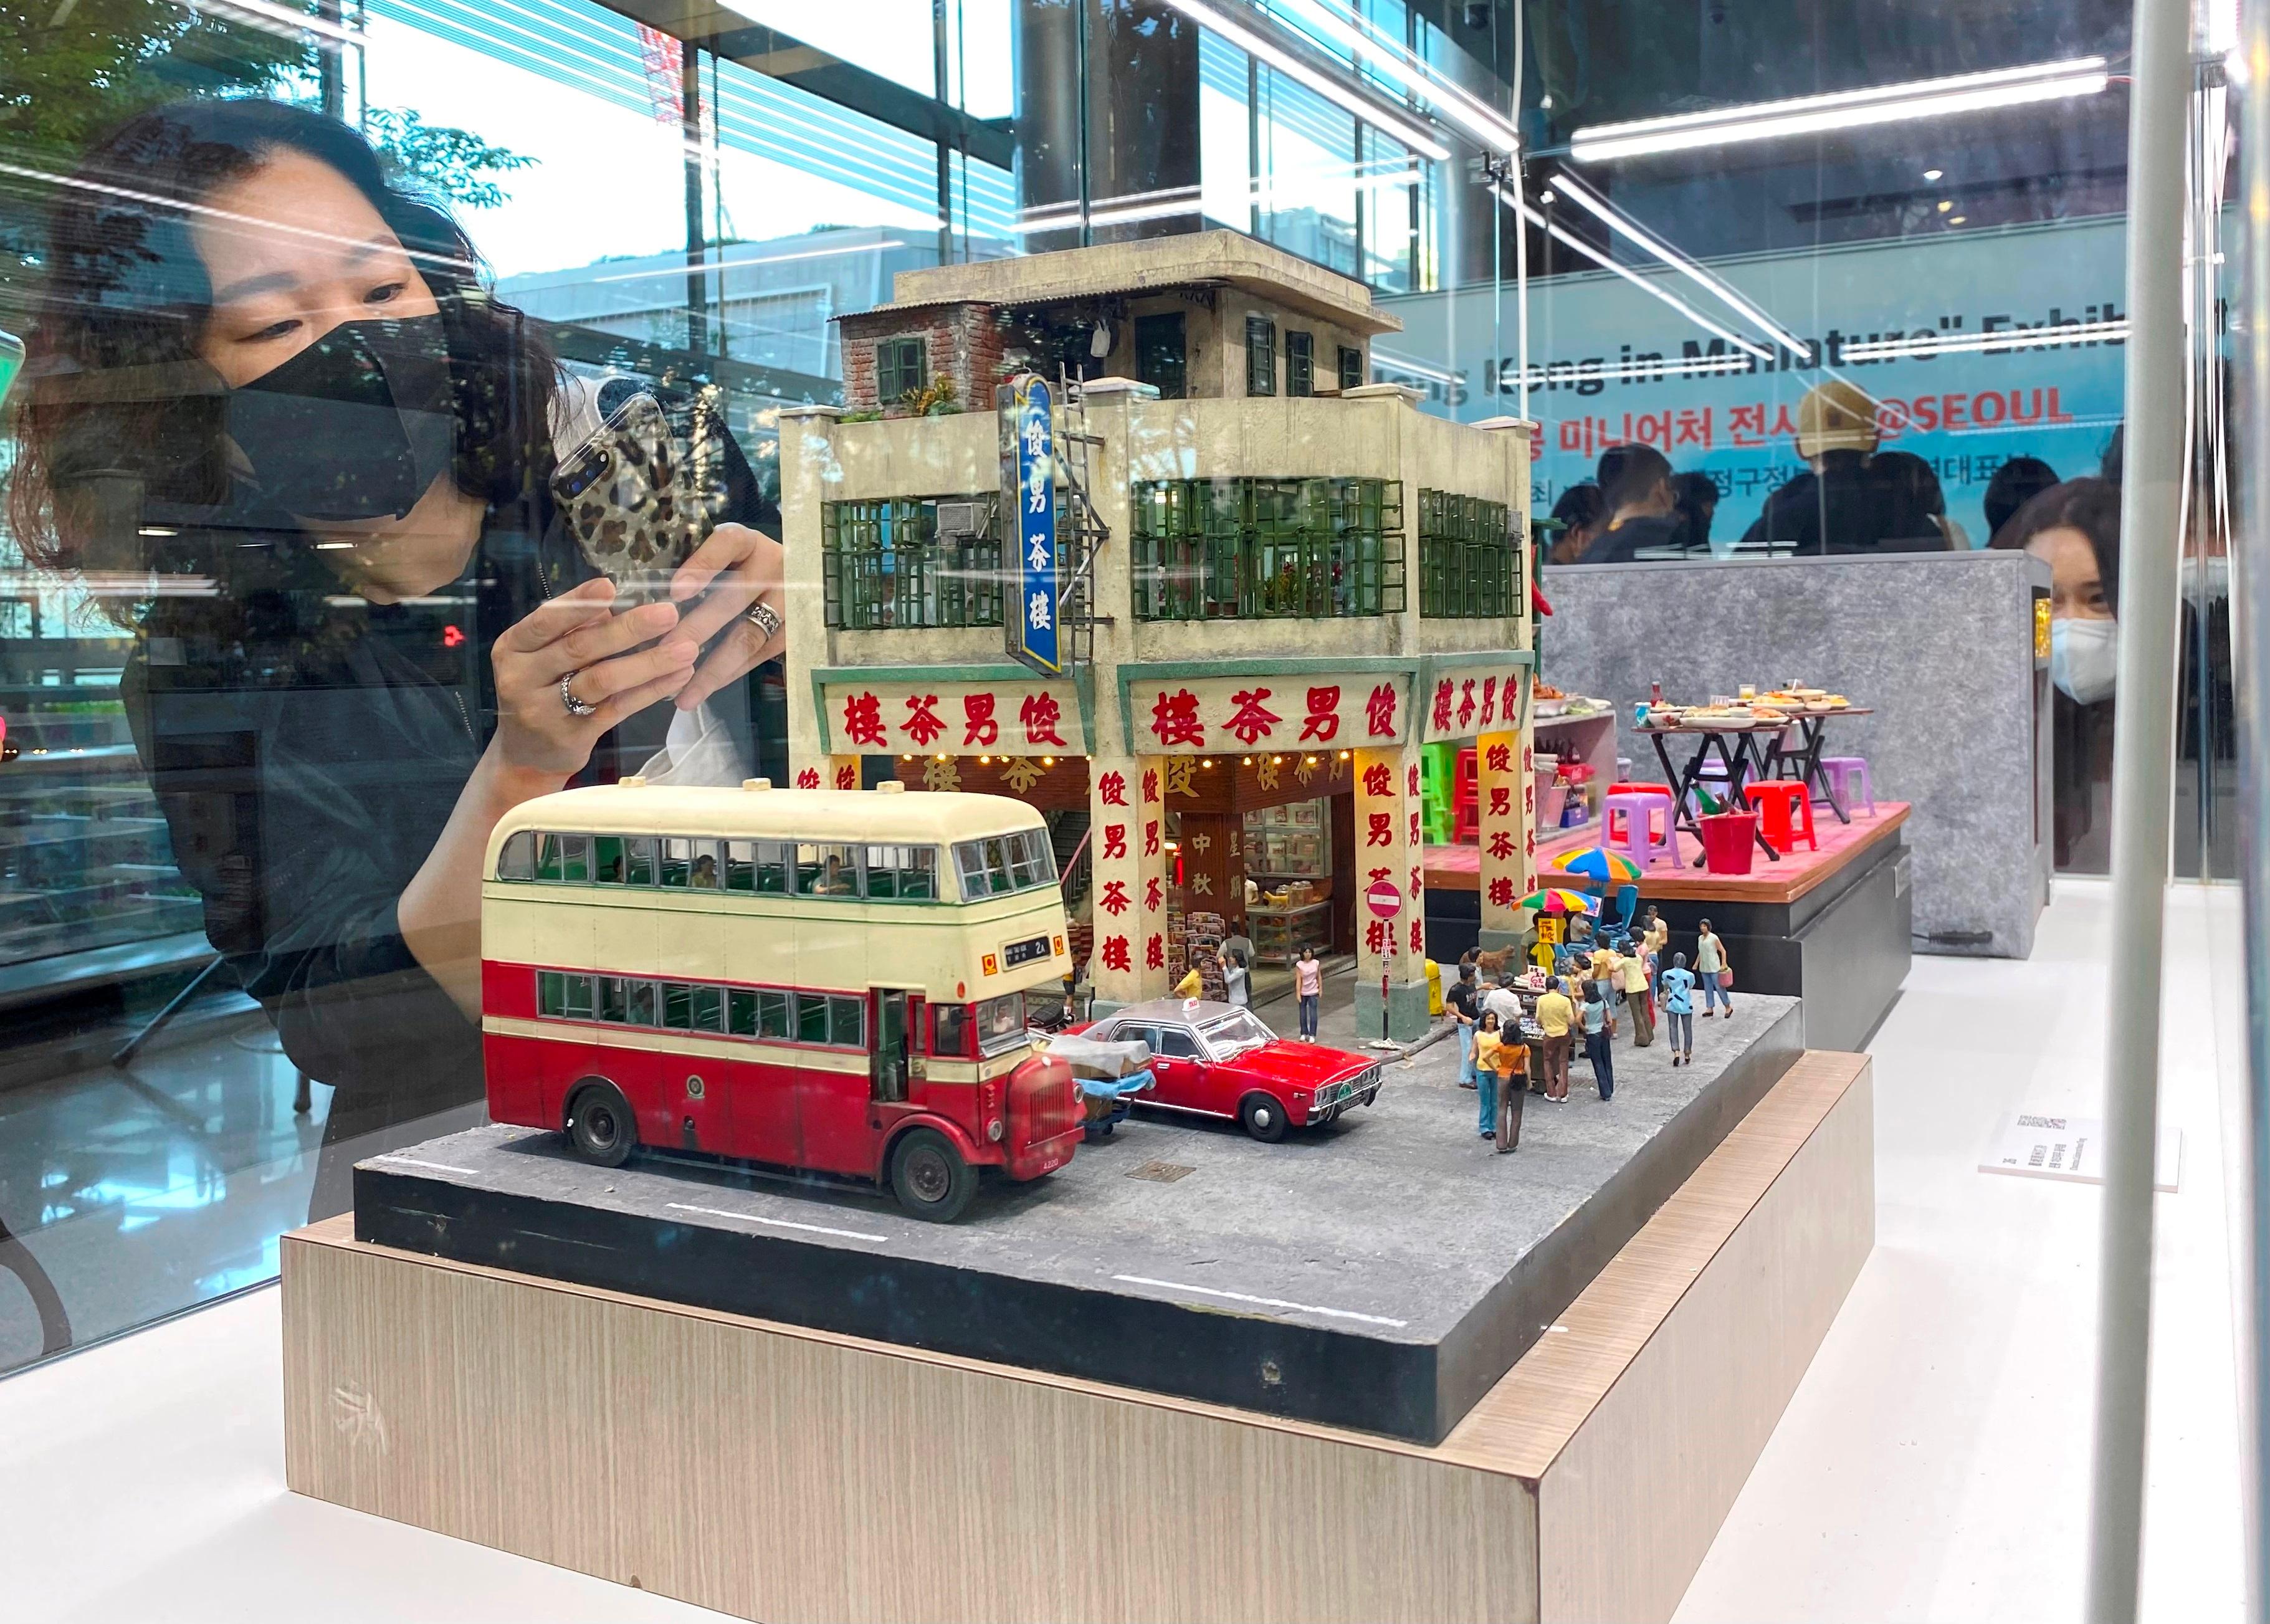  The "Hong Kong in Miniature" Exhibition @Seoul 2022, which showcases 40 miniature models that capture the uniqueness and vibrancy of Hong Kong, opened in Seoul, Korea, today (September 24). Photo shows a miniature model of Handsome Man Teahouse.